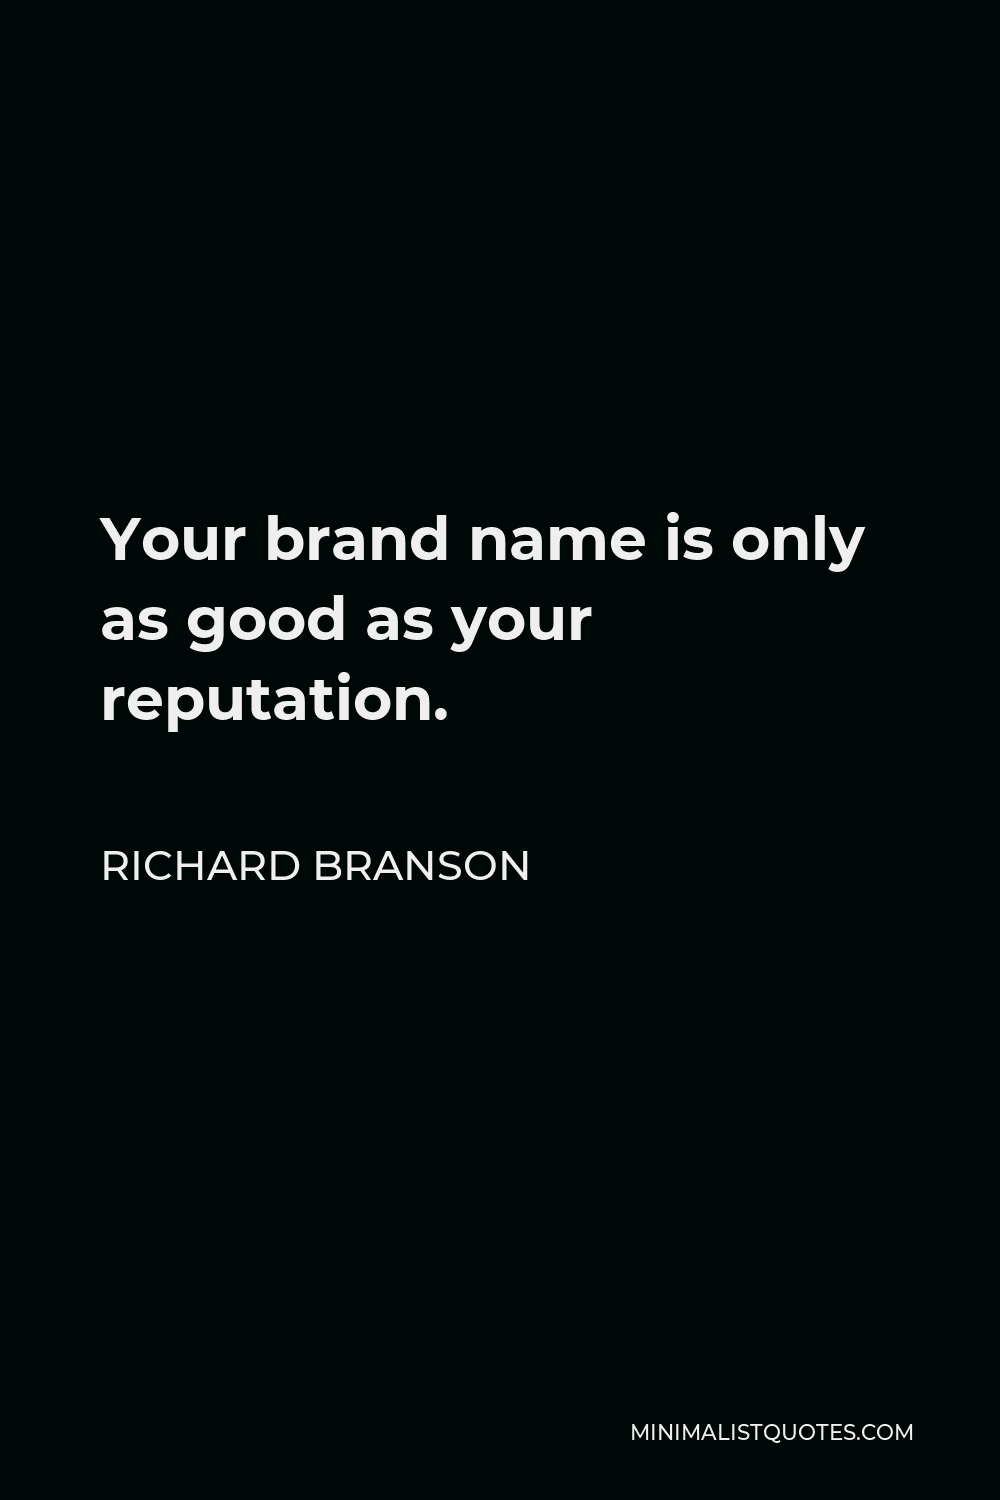 Richard Branson Quote - Your brand name is only as good as your reputation.